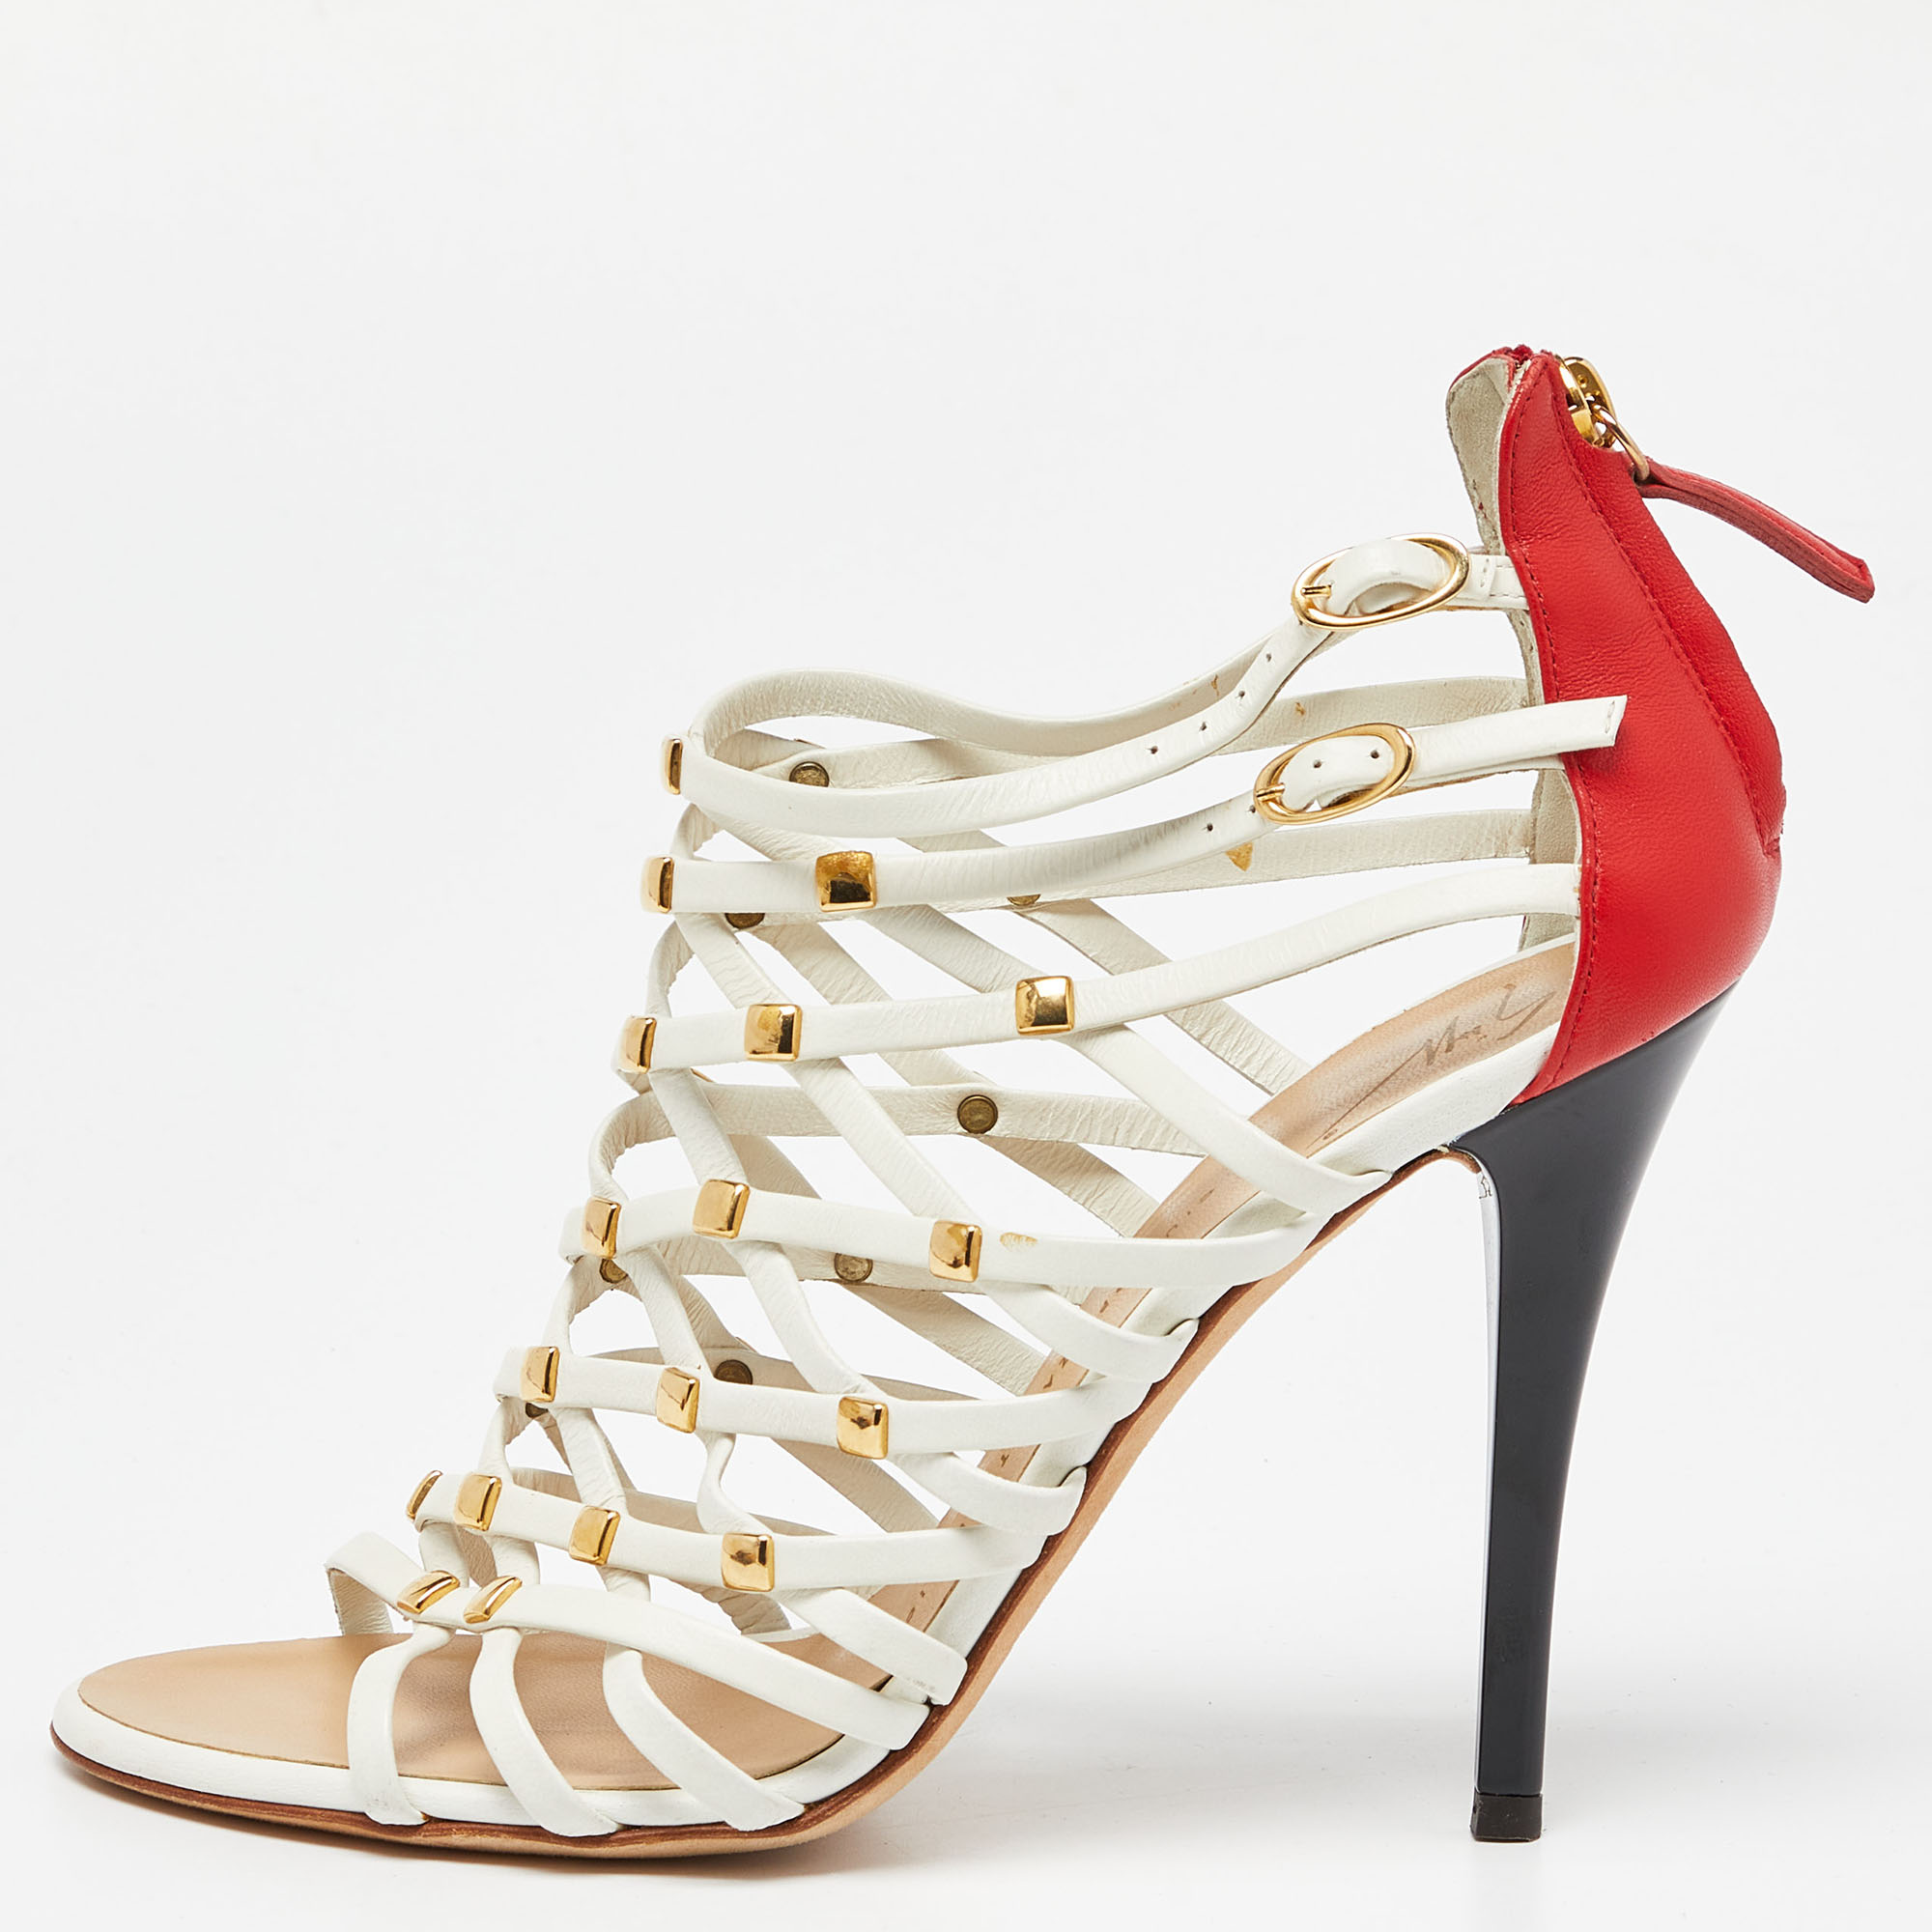 Giuseppe Zanotti White/Red Leather Embellished Strappy Sandals Size 38.5